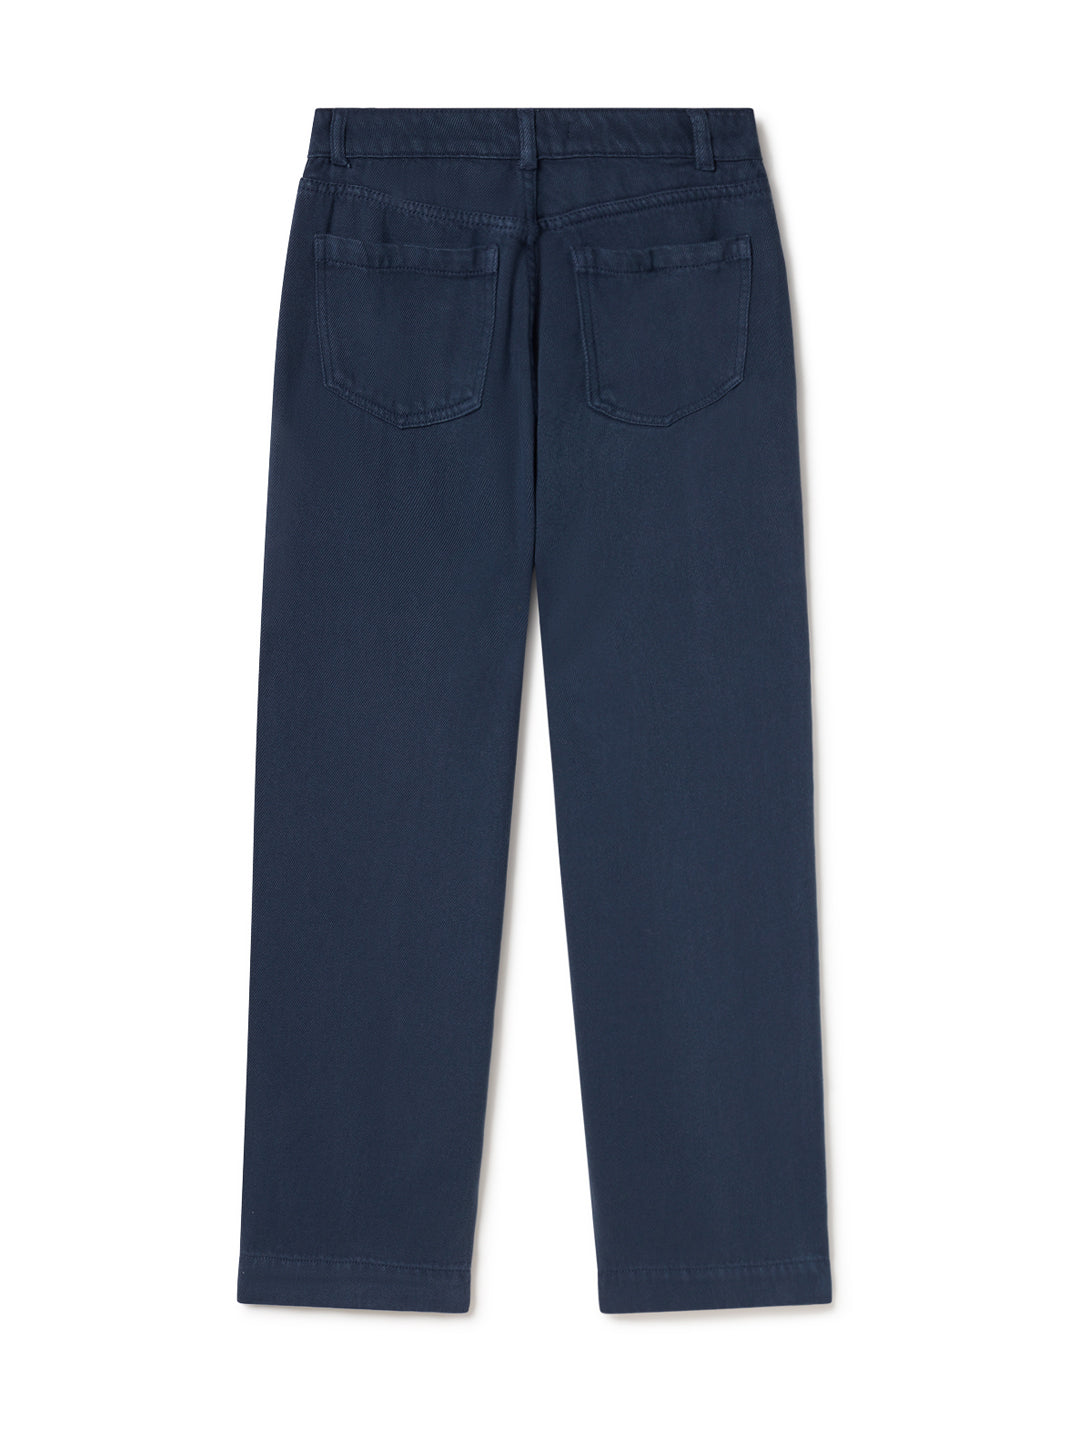 Pants Women - Hisaka - Washed Navy | Fair Fashion by TWOTHIRDS